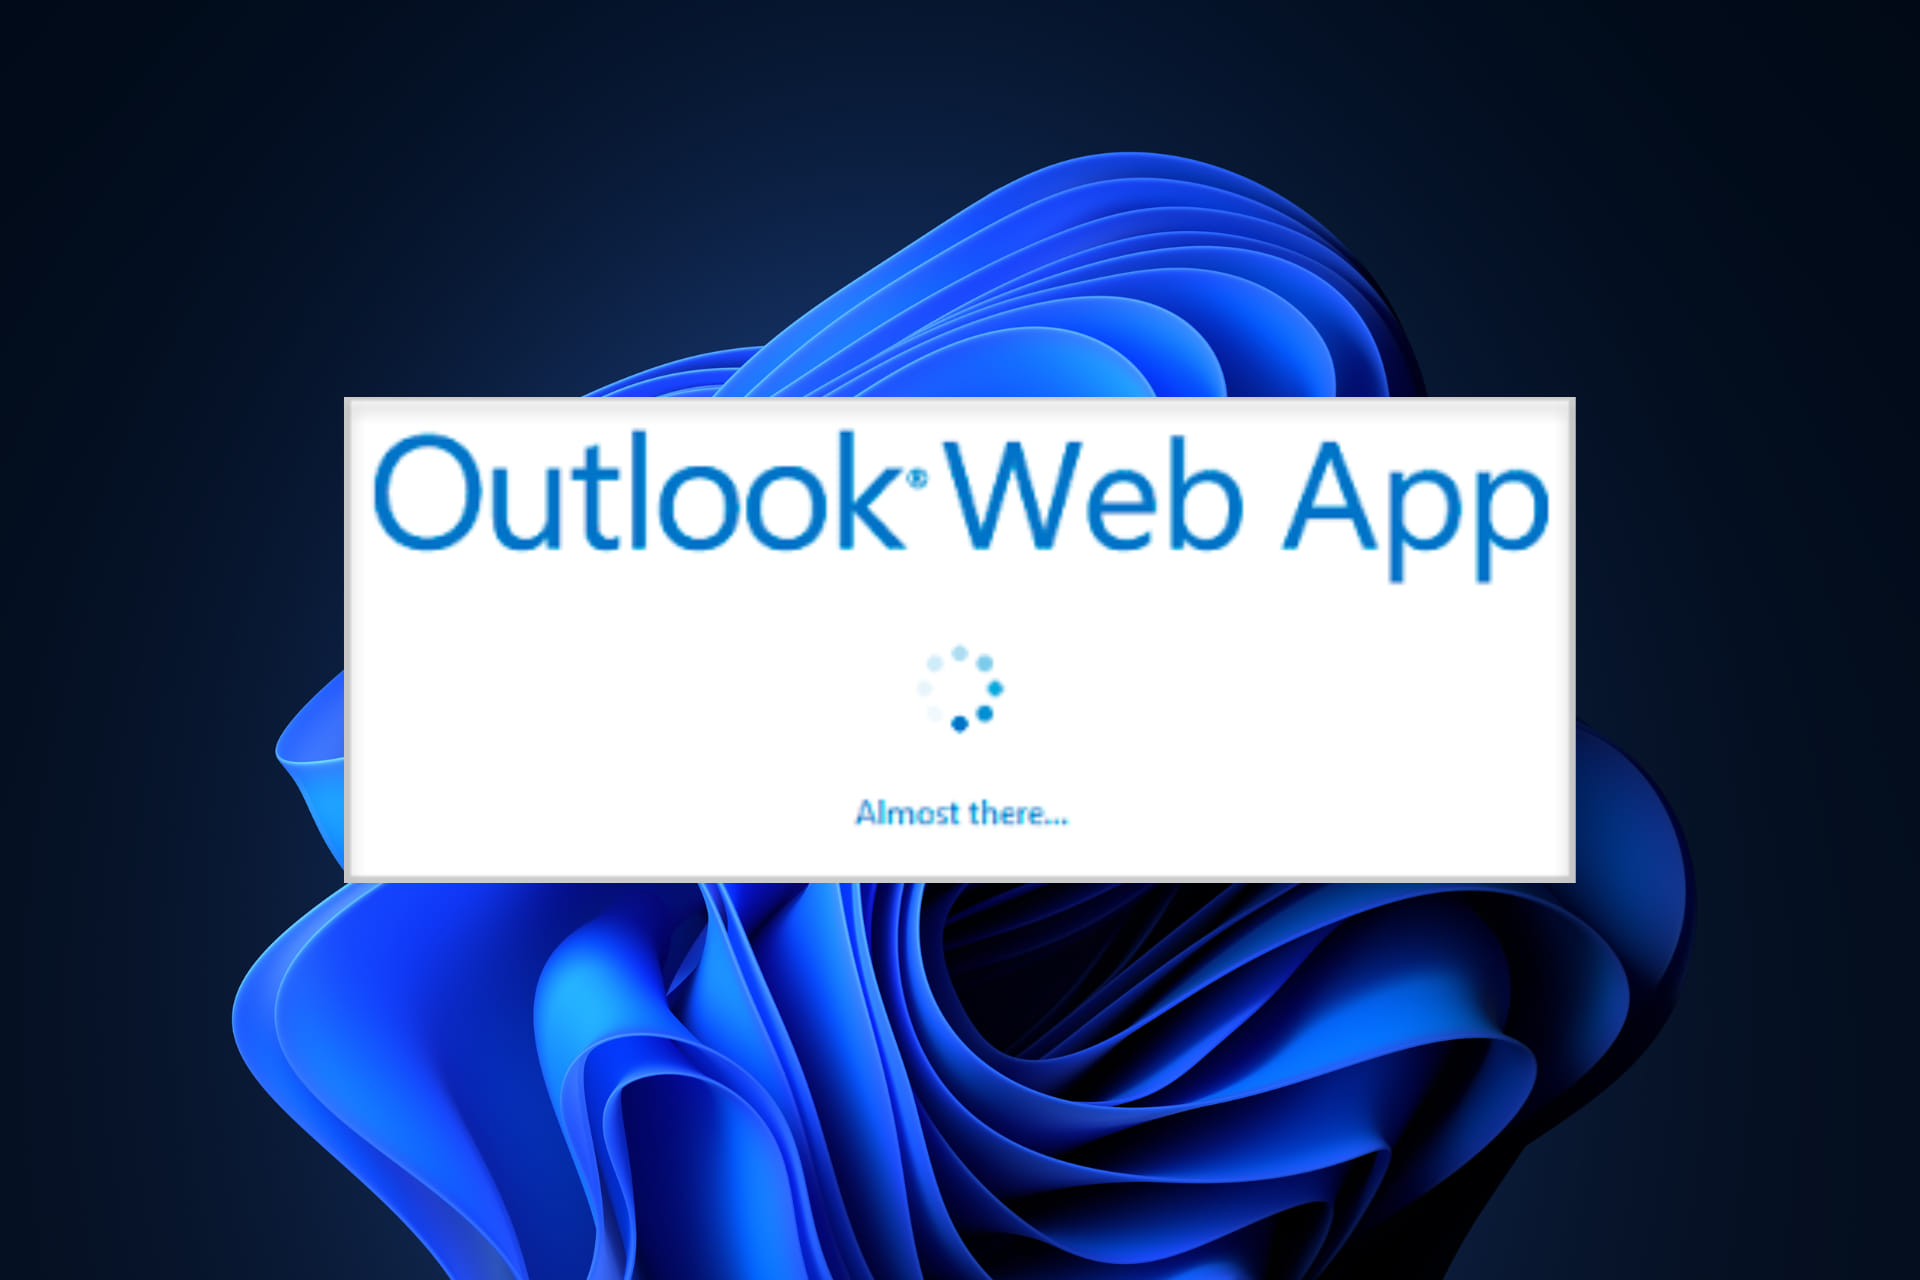 Outlook Web App will soon replace the classic one.